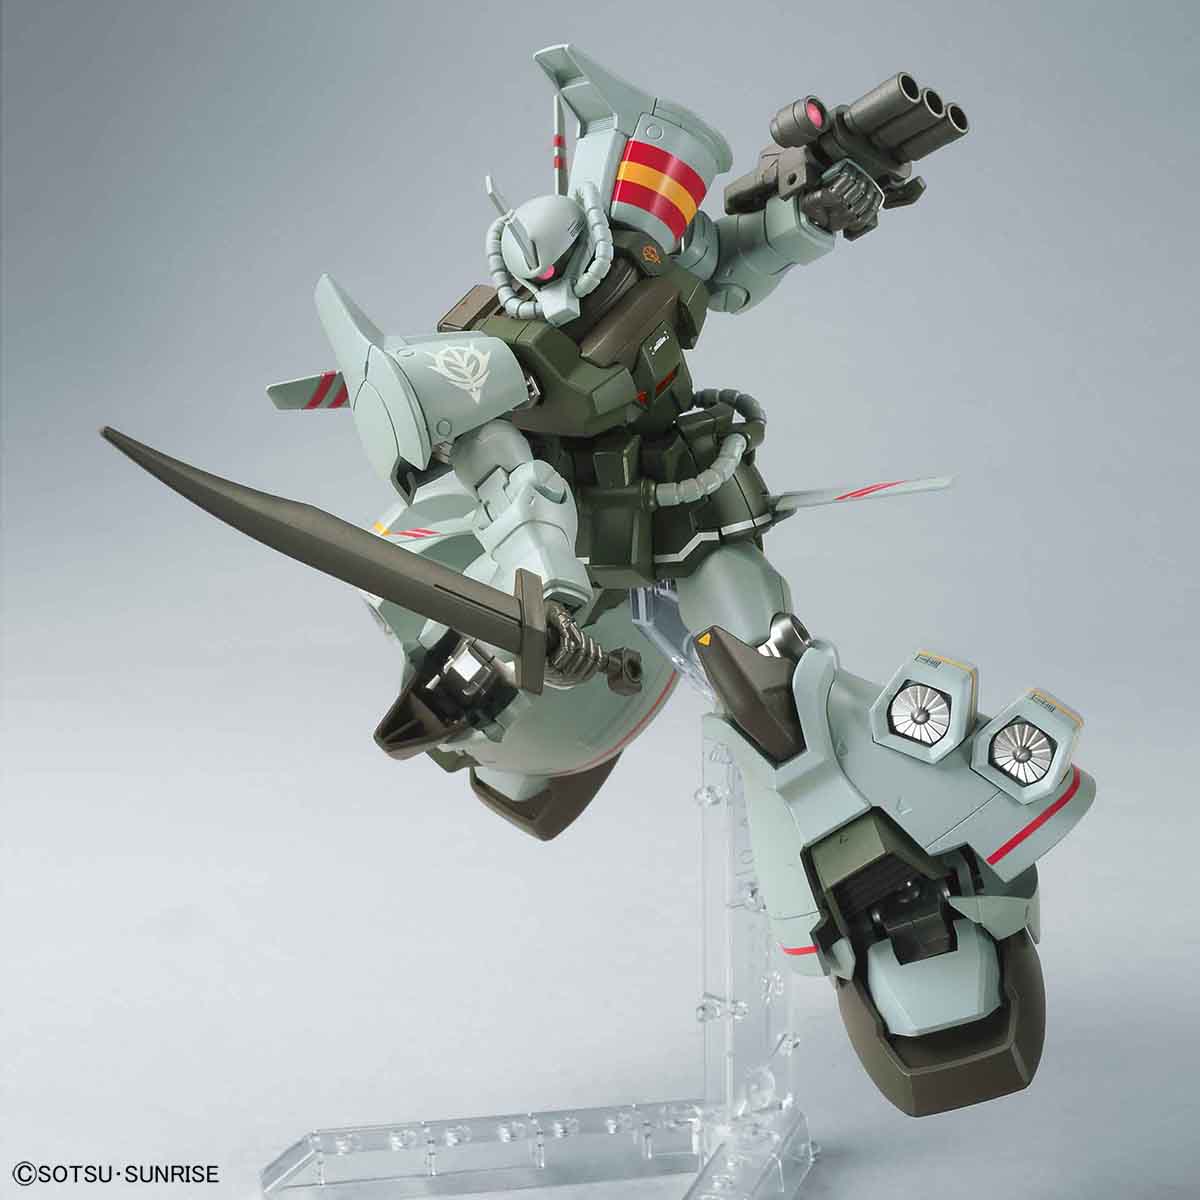 Bandai HGUC Gouf Flight Type 1/144 4549660283256 From Japan for sale online 